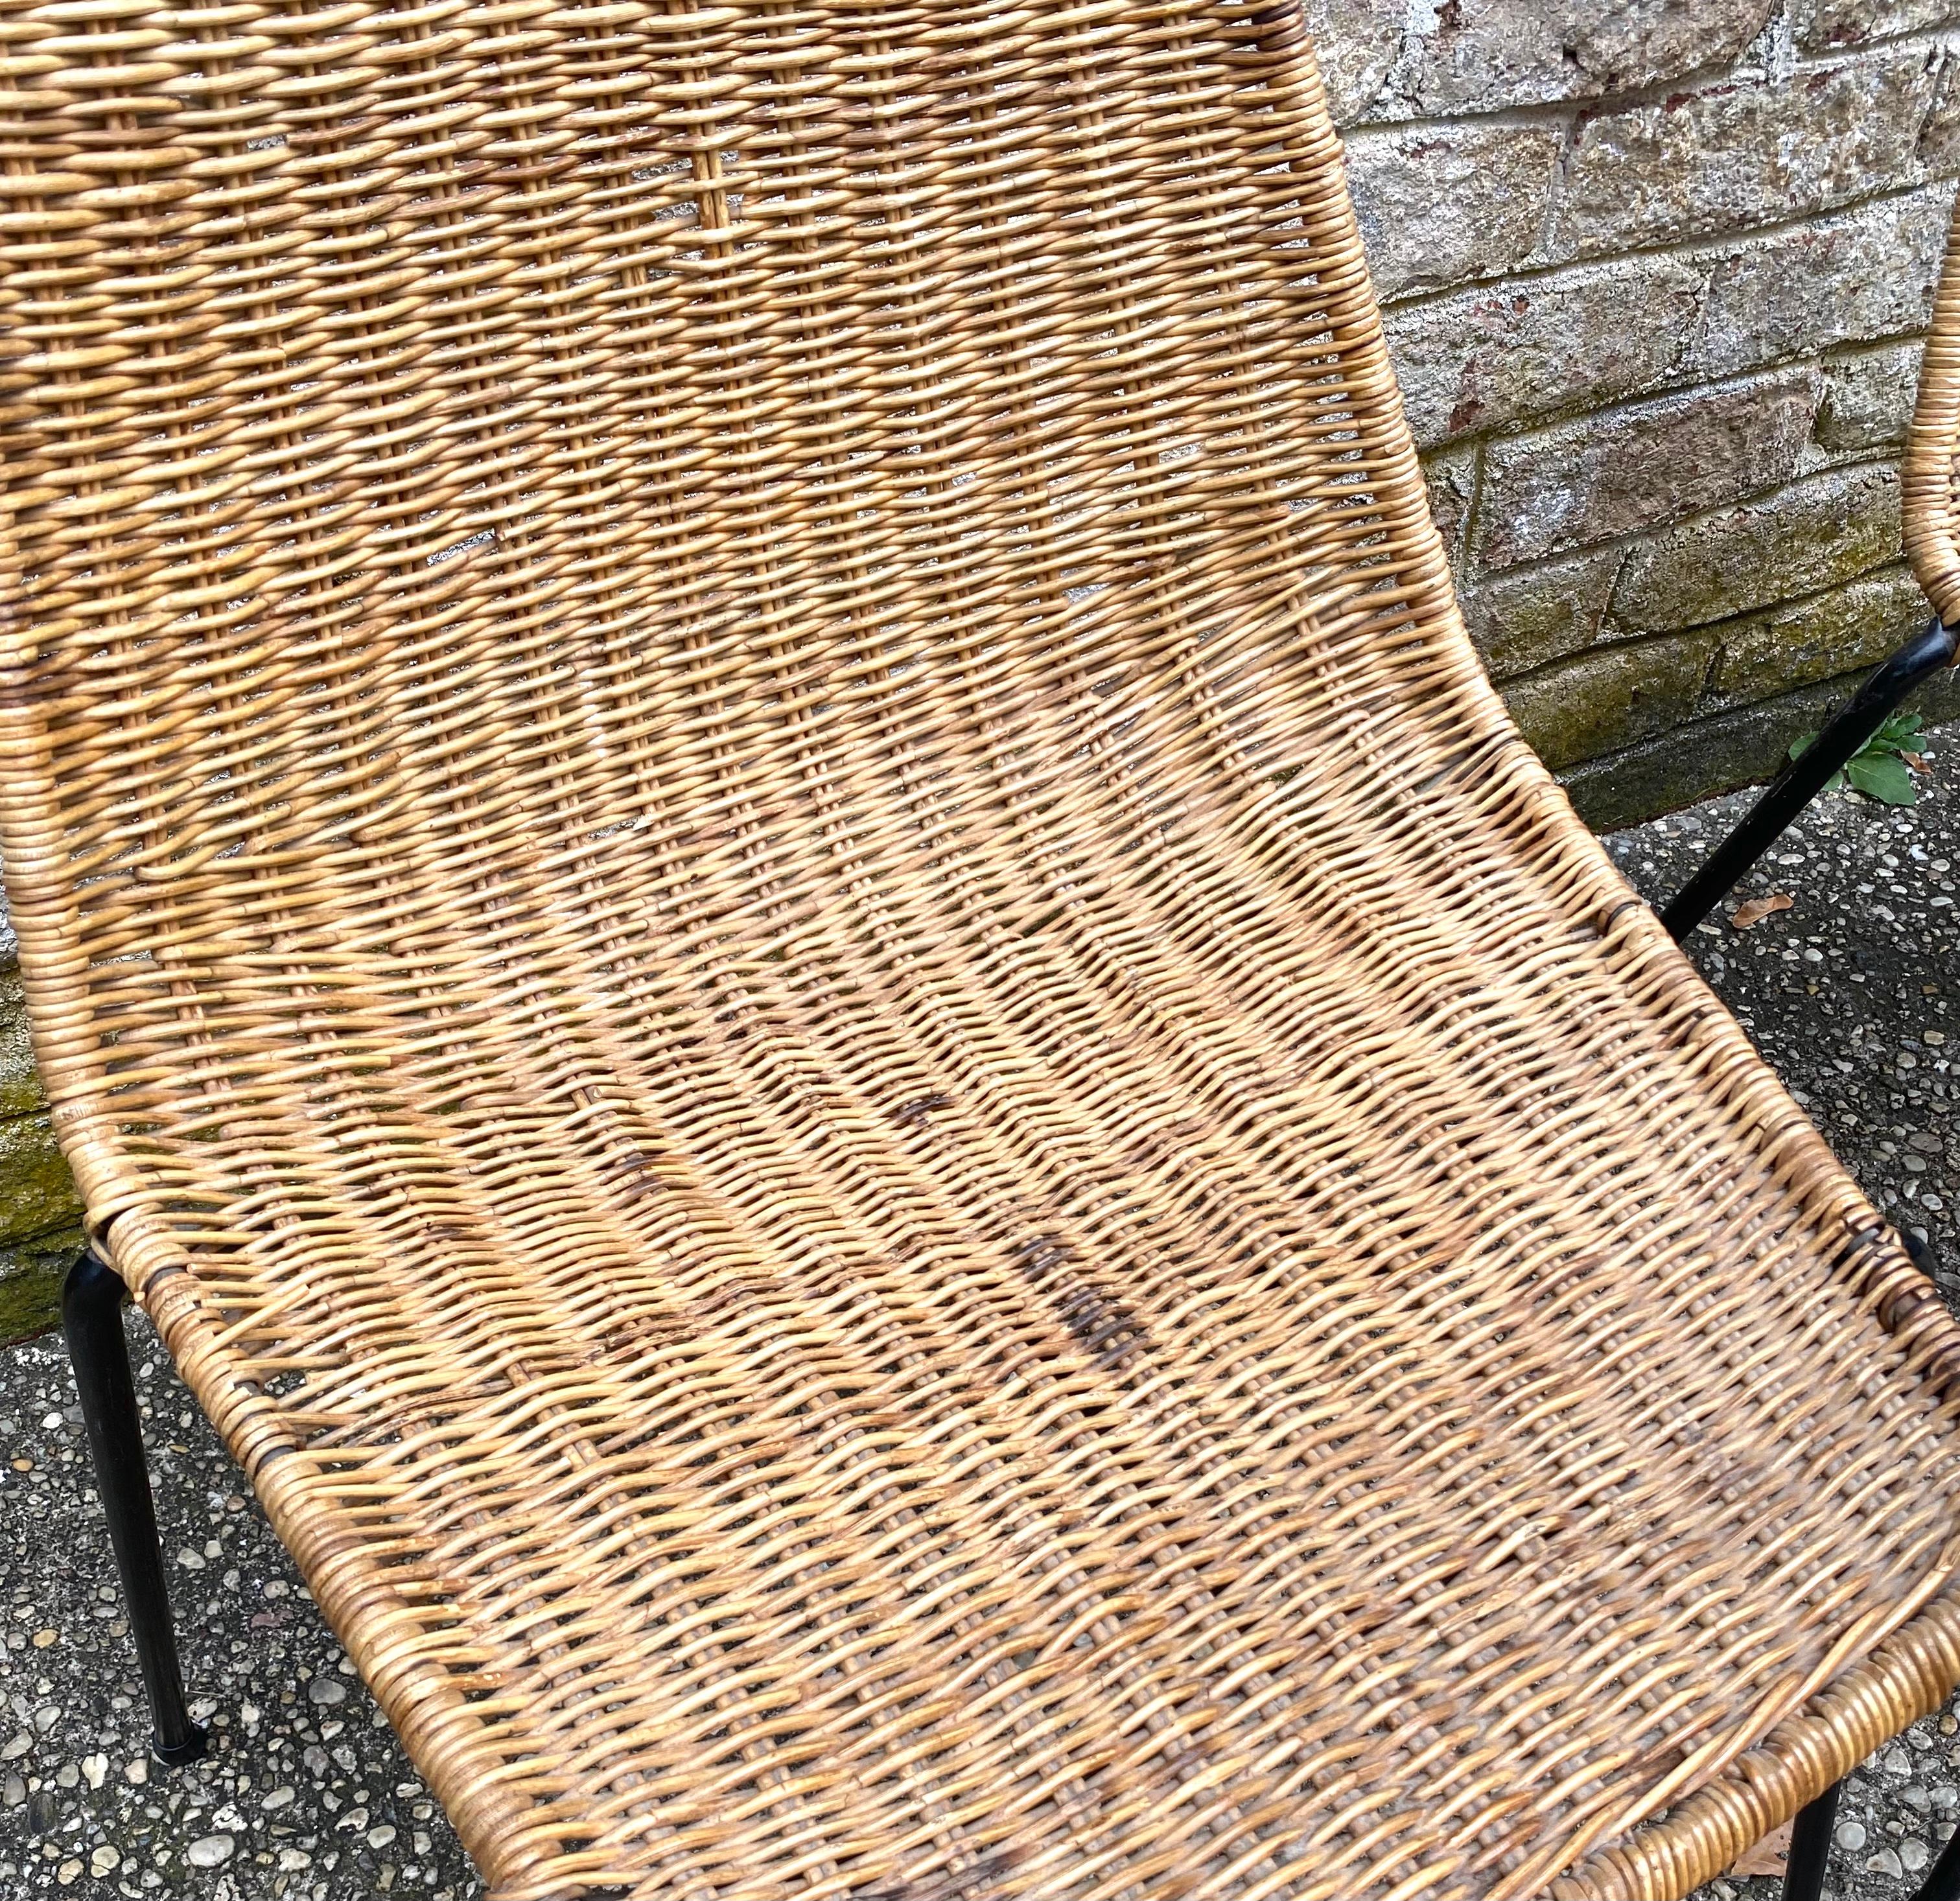 Set of 5 Gian Franco Legler Basket Chairs In Good Condition For Sale In East Hampton, NY